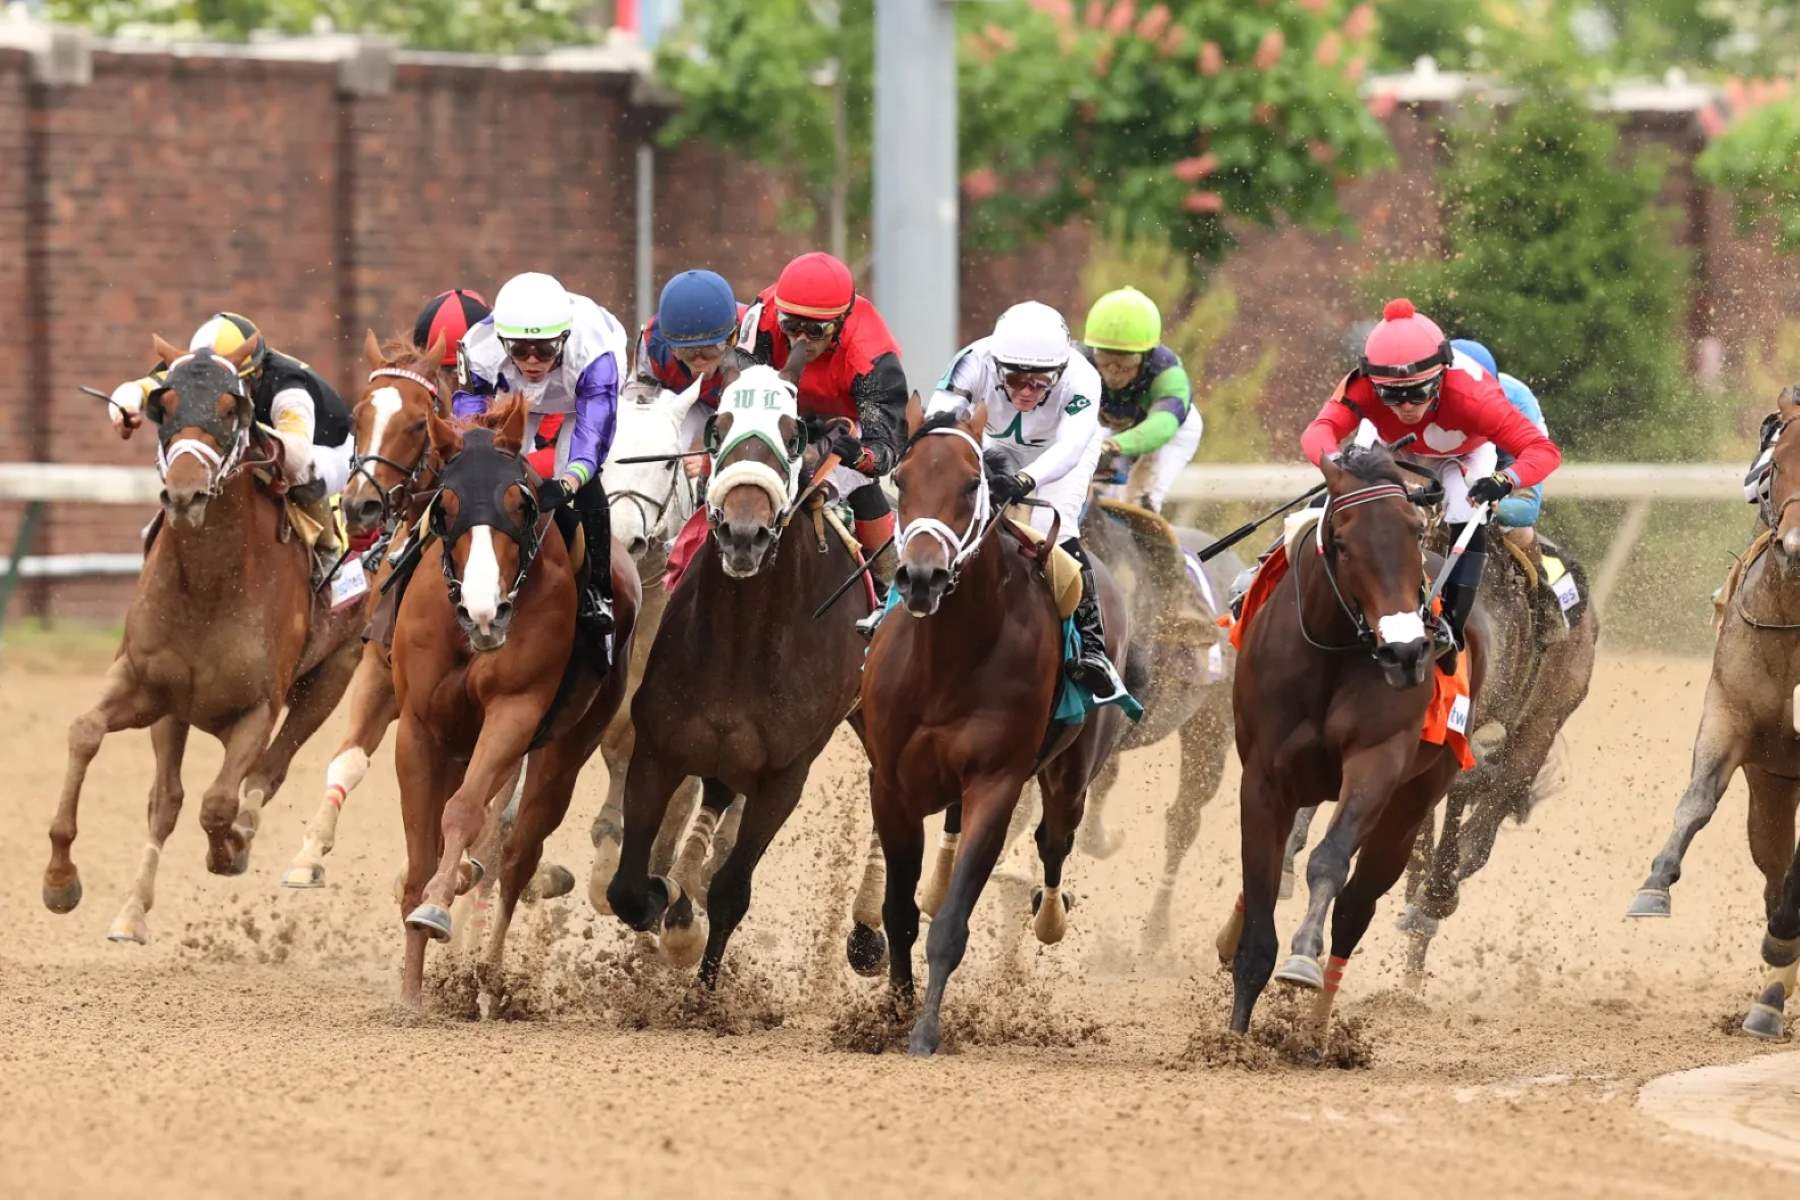 How To Watch The Kentucky Derby